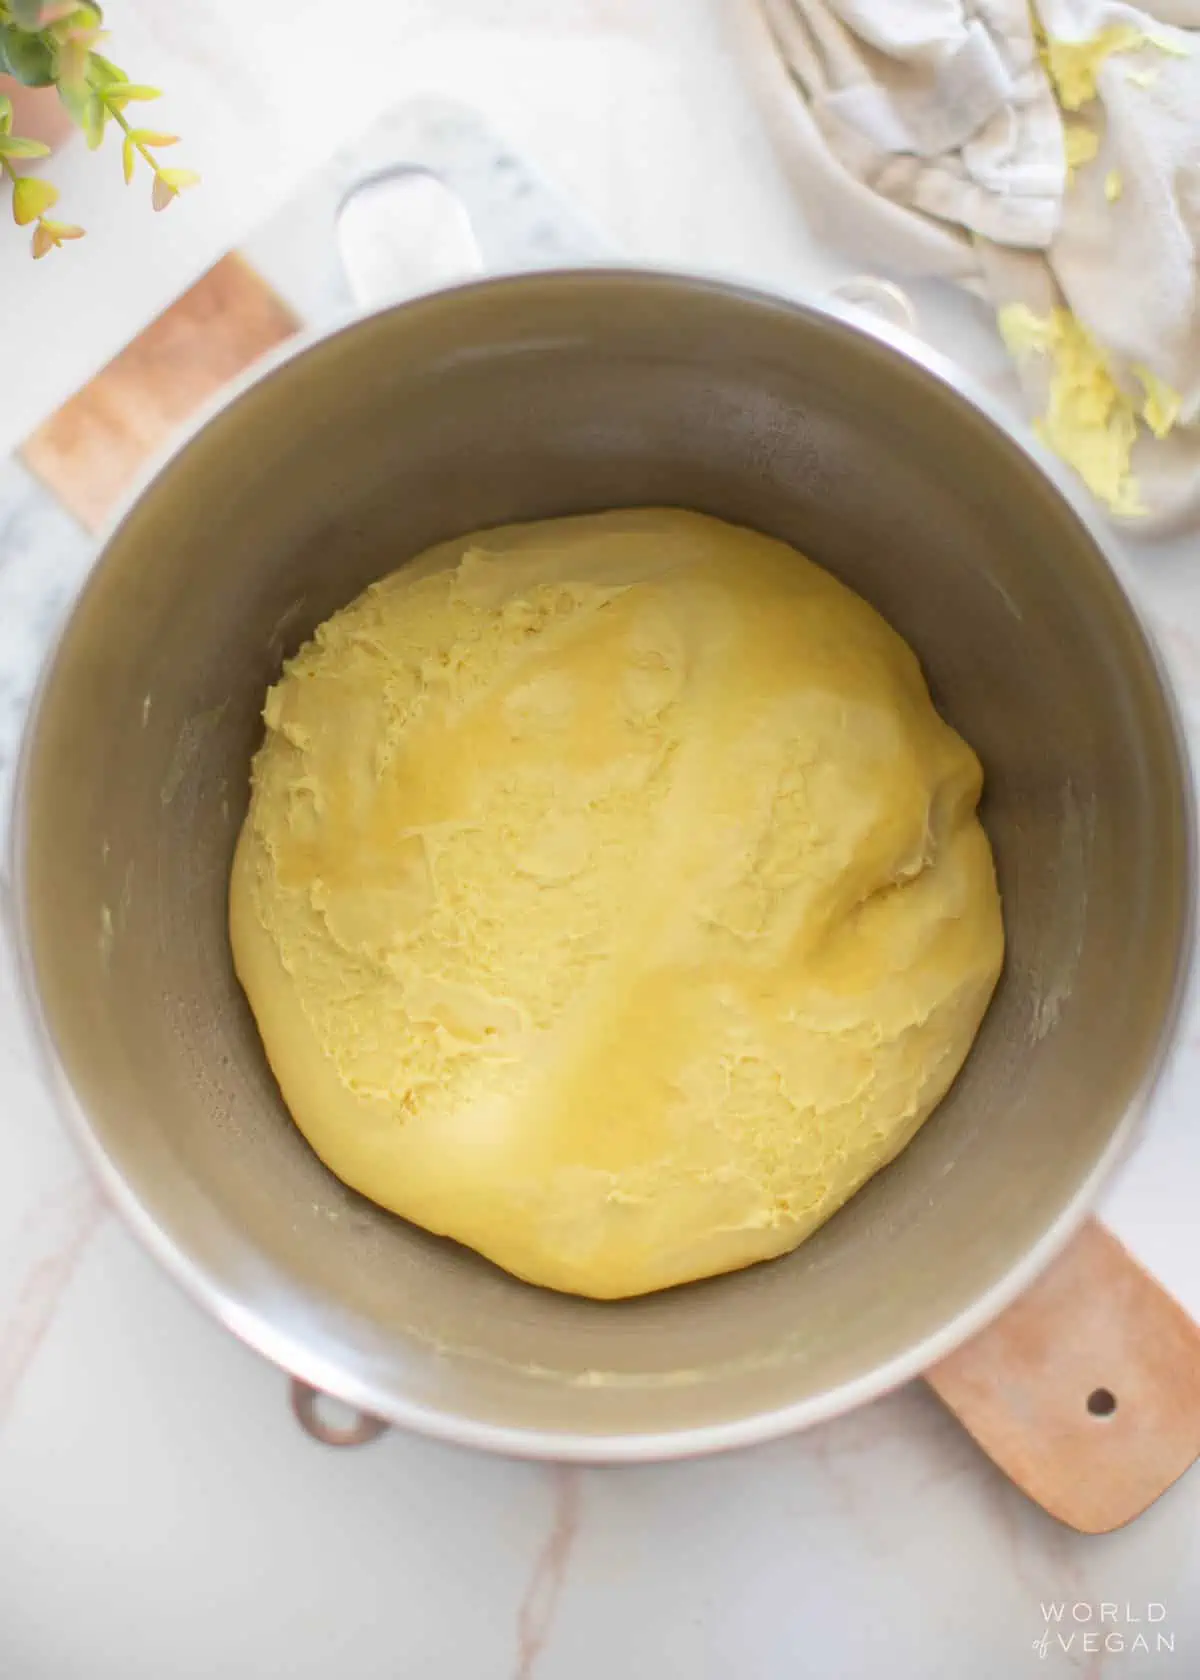 Vegan challah dough placed in a greased bowl to rise.